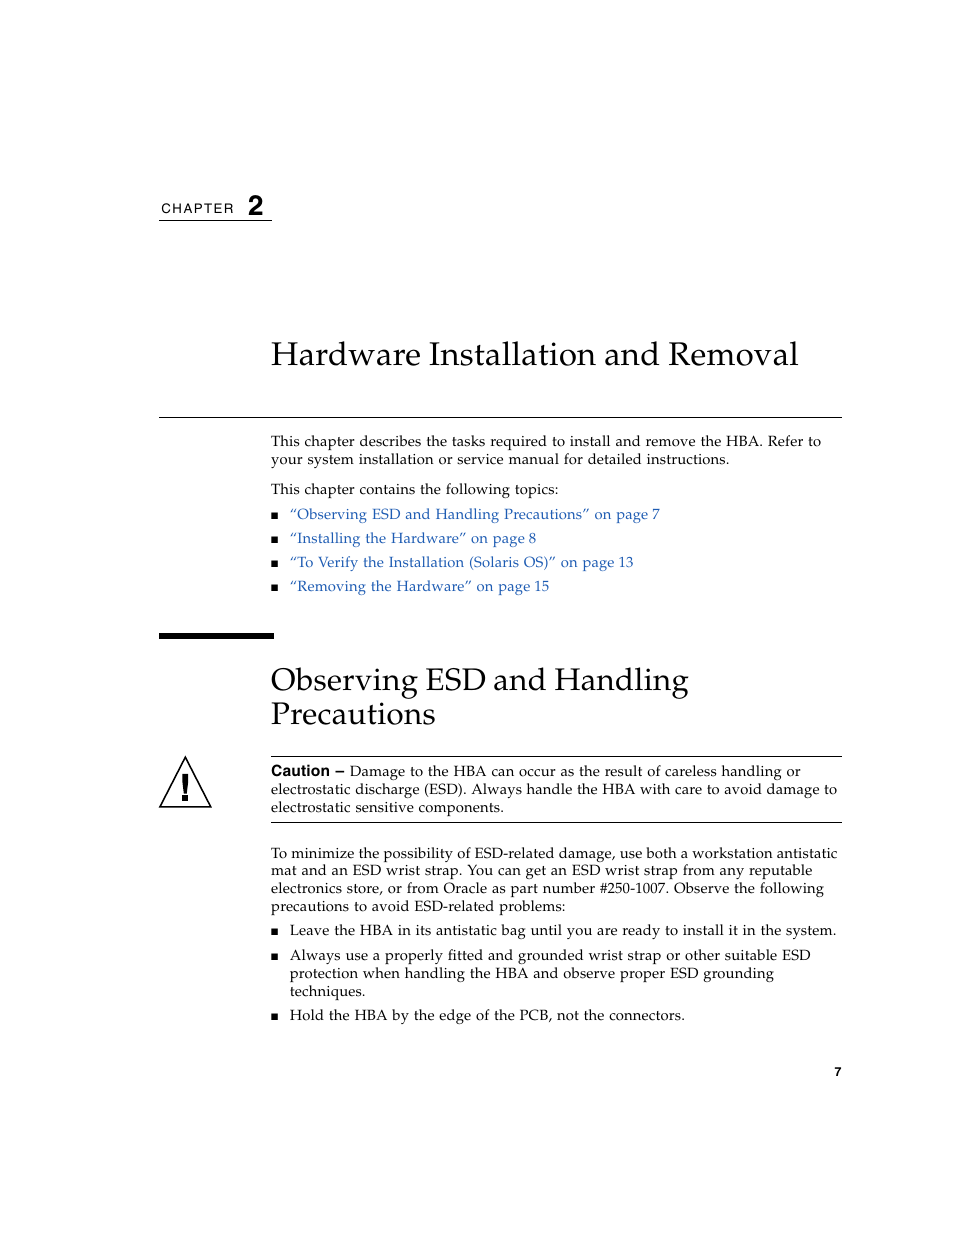 Hardware installation and removal, Observing esd and handling precautions | Oracle Audio Technologies Sun StorageTek ATCA 4Gb FC Dual Port HBA SG-XPCIE2FC-ATCA-Z User Manual | Page 13 / 48